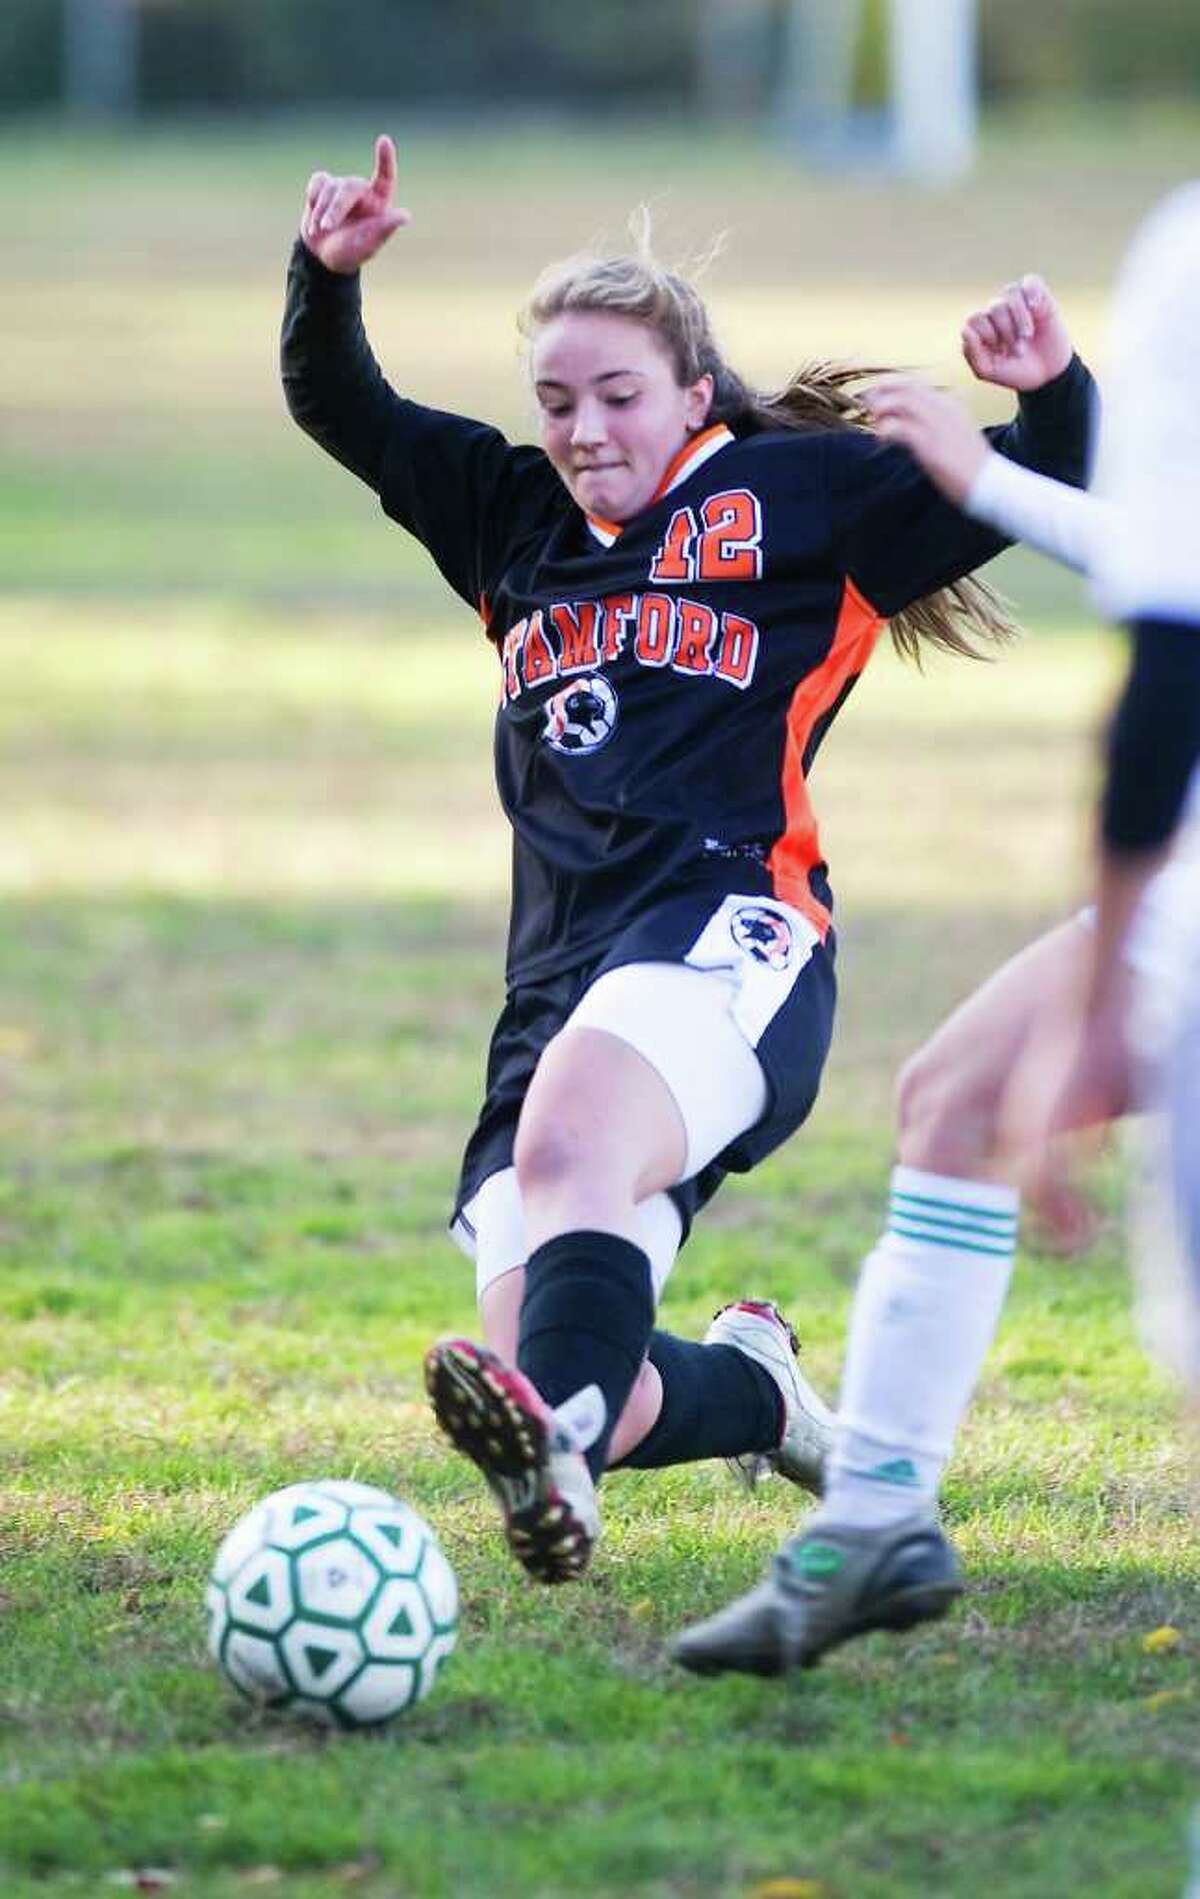 Stamford High School's Angela Altamura reaches for the ball against Trinity Catholic High School in girls soccer at Trinity in Stamford, Conn. on Friday October 22, 2010.